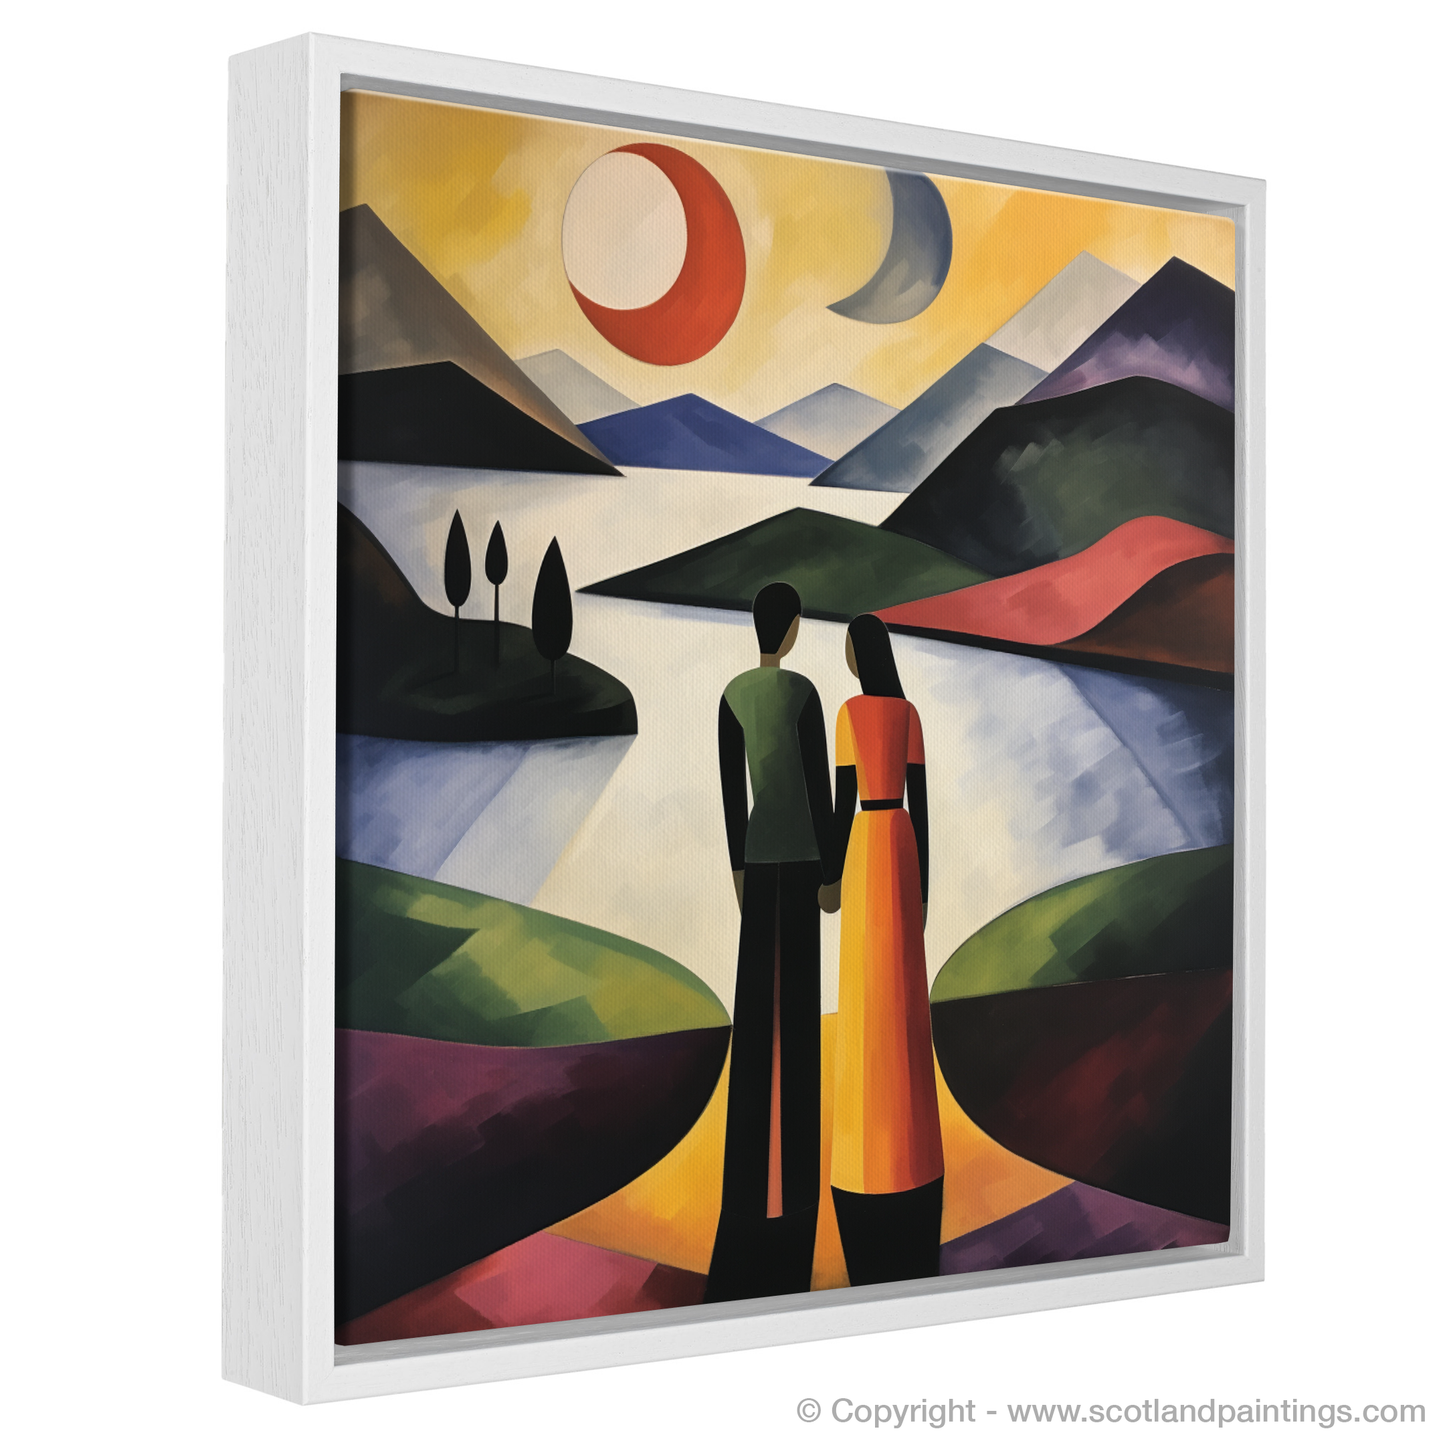 Painting and Art Print of A couple holding hands looking out on Loch Lomond entitled "Embracing Nature's Romance: Loch Lomond at Dusk".